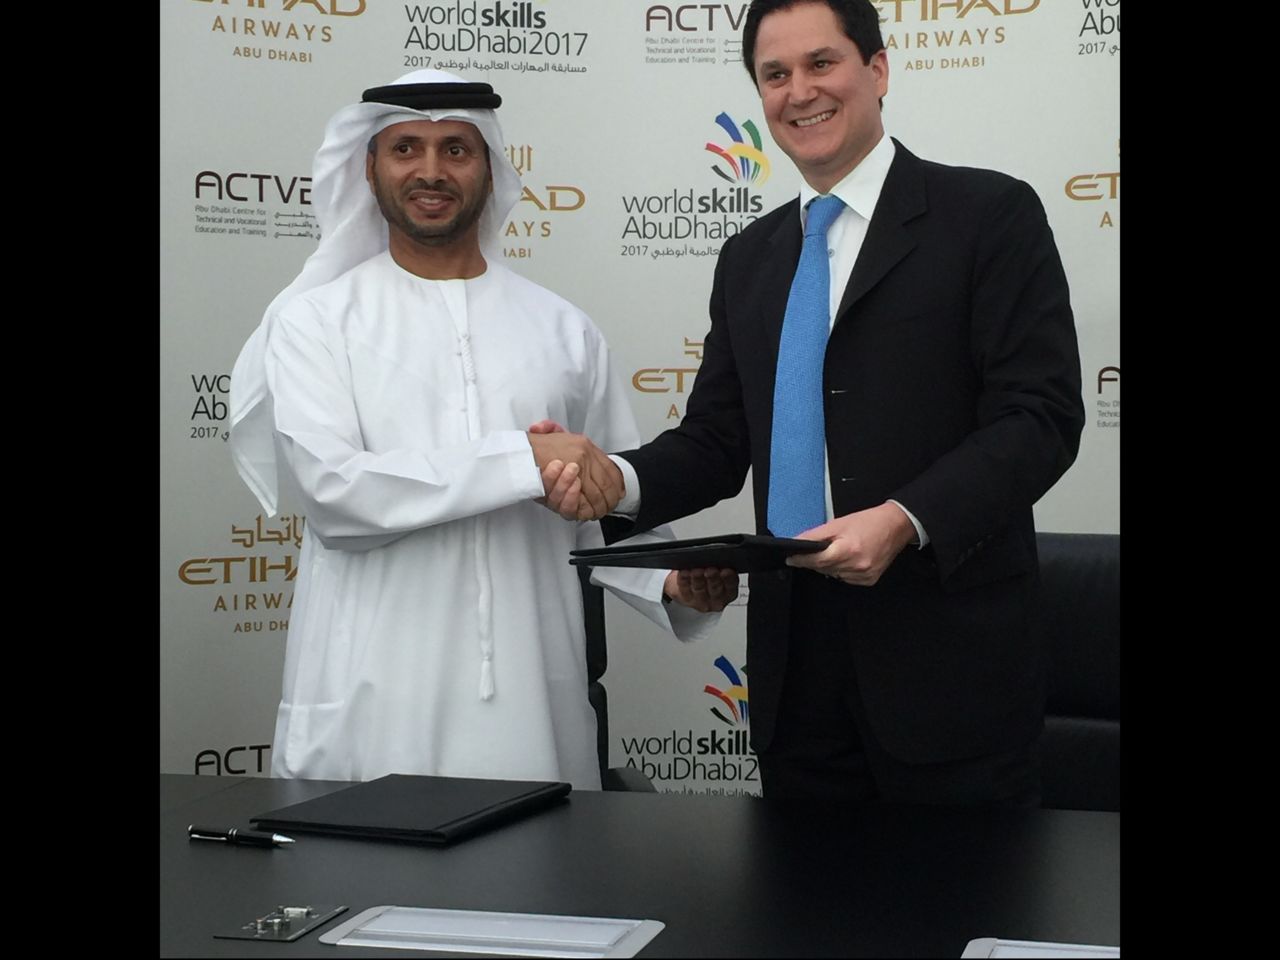 Etihad Airways becomes the official airline sponsor of WorldSkills Abu Dhabi 2017